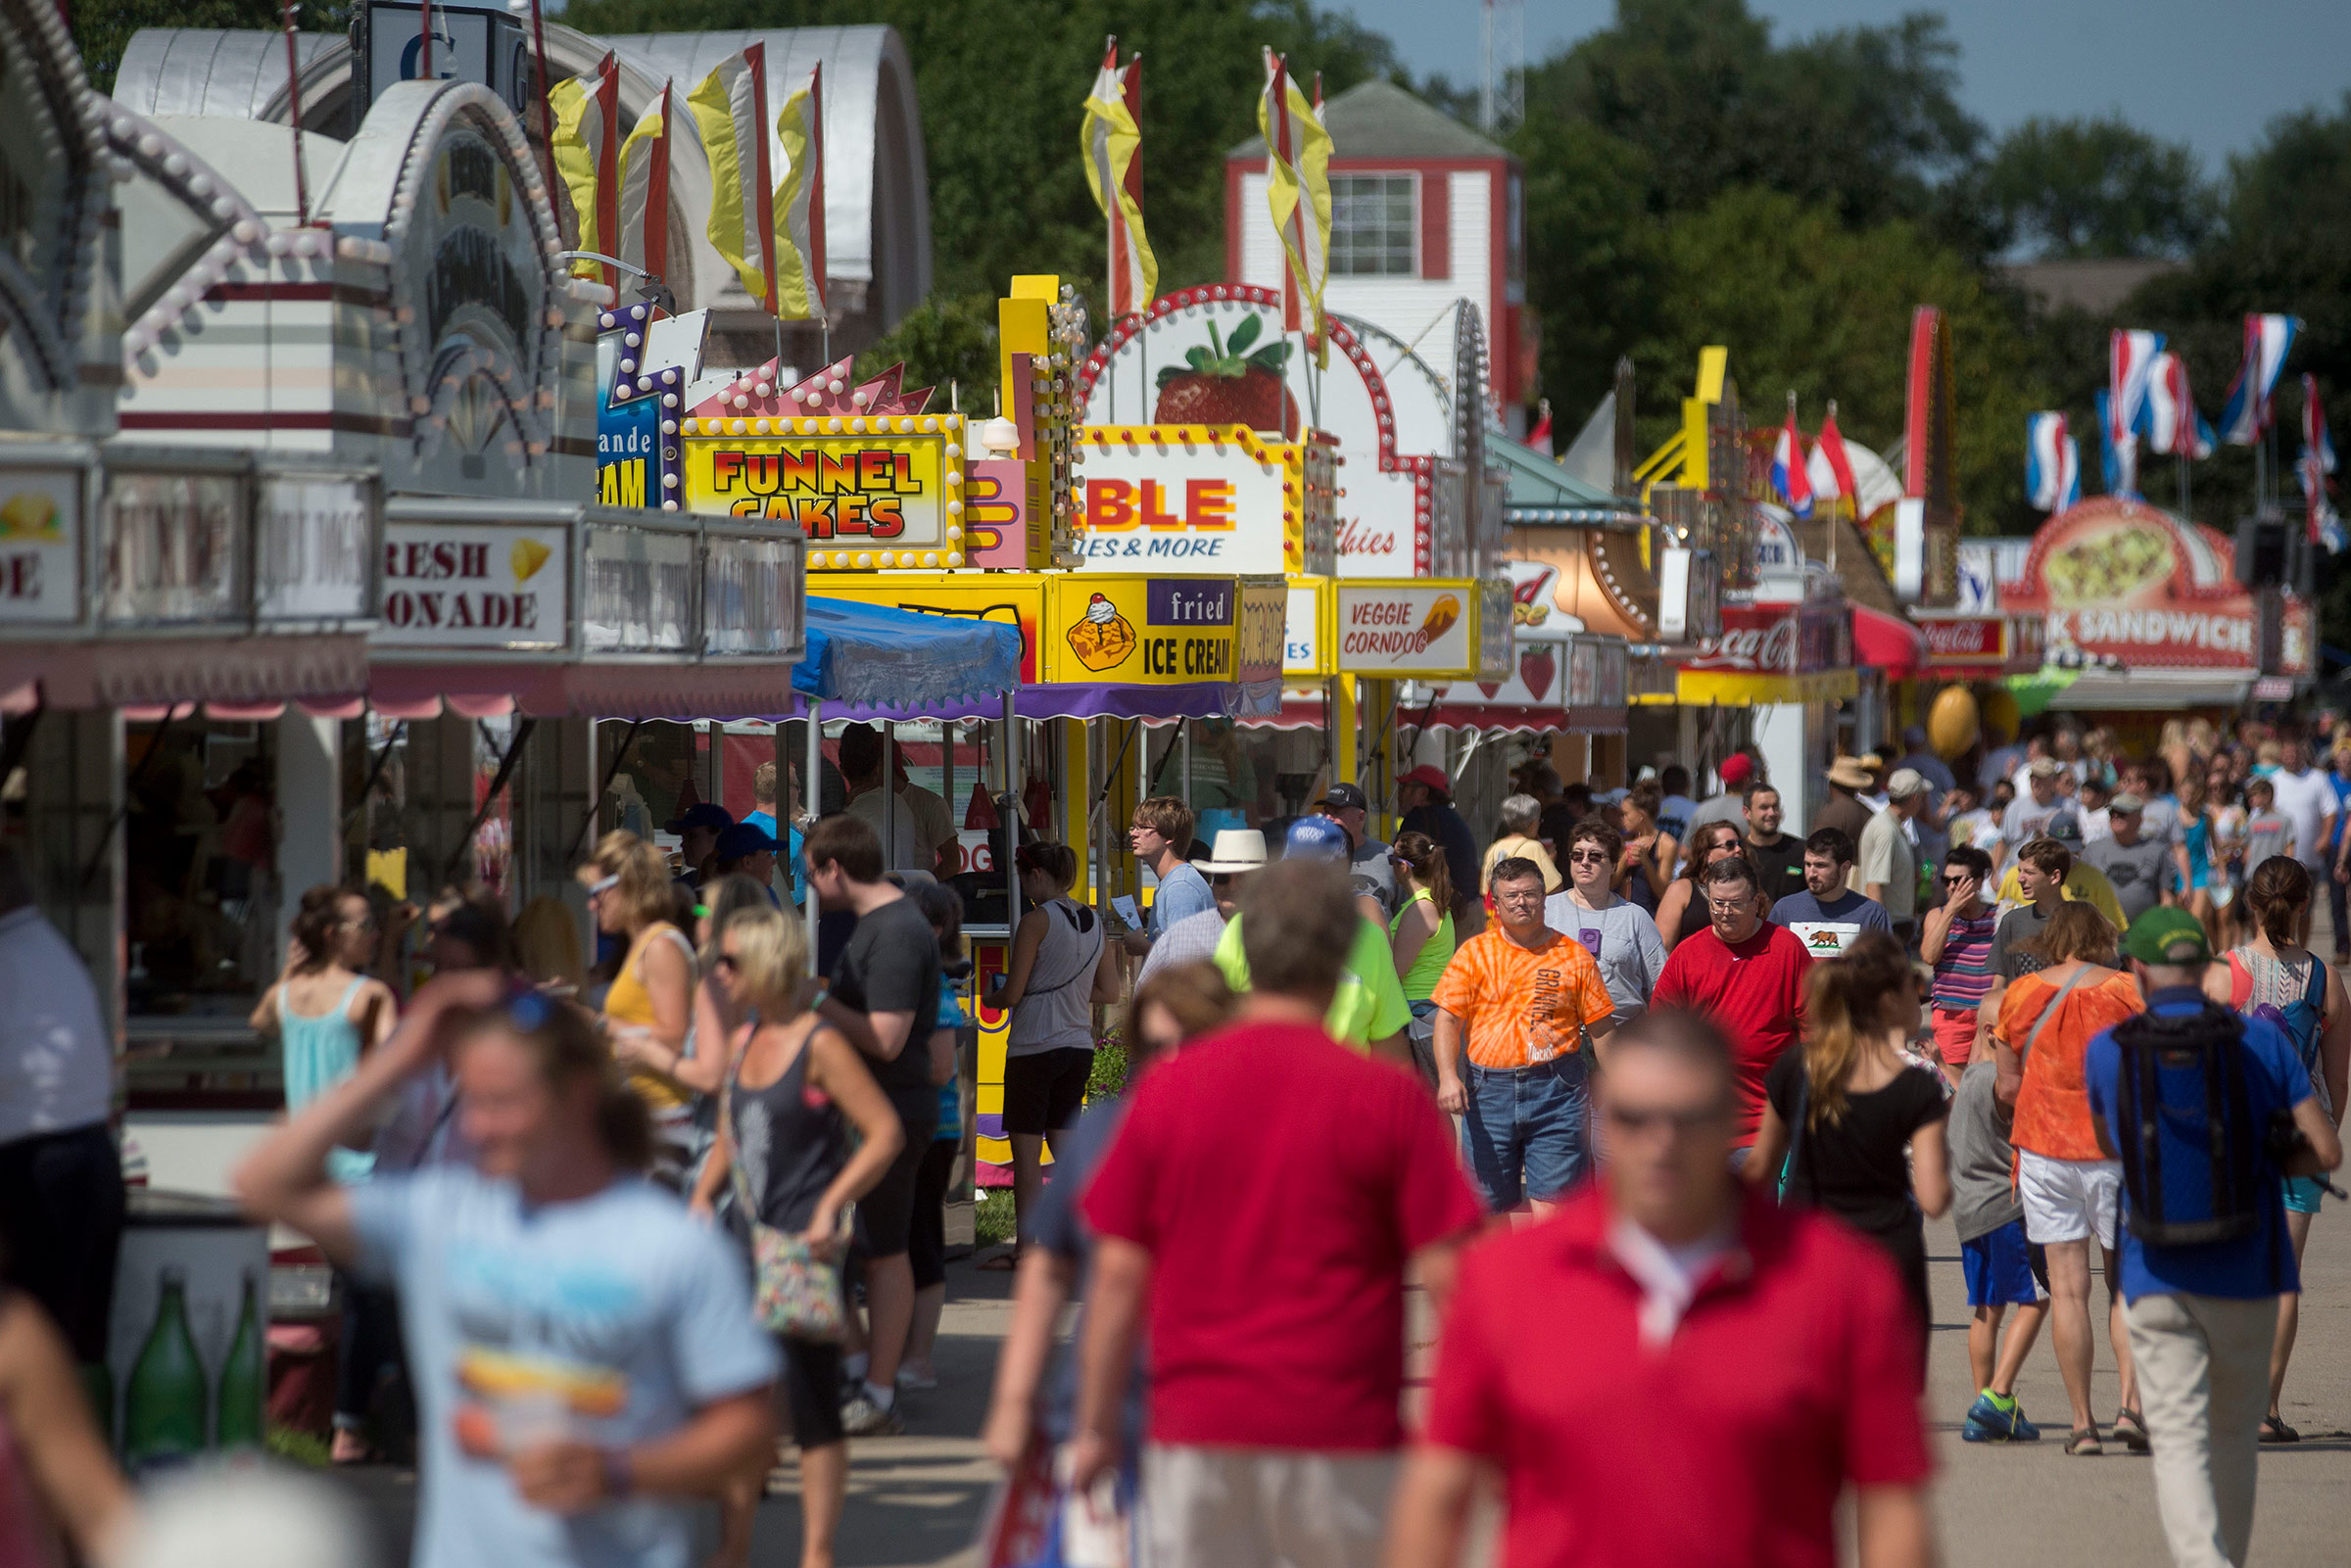 Attendees walk past food stands at the Iowa State Fair in Des Moines, Iowa, U.S. in August 2015. (Andrew Harrer—Bloomberg/Getty Images)